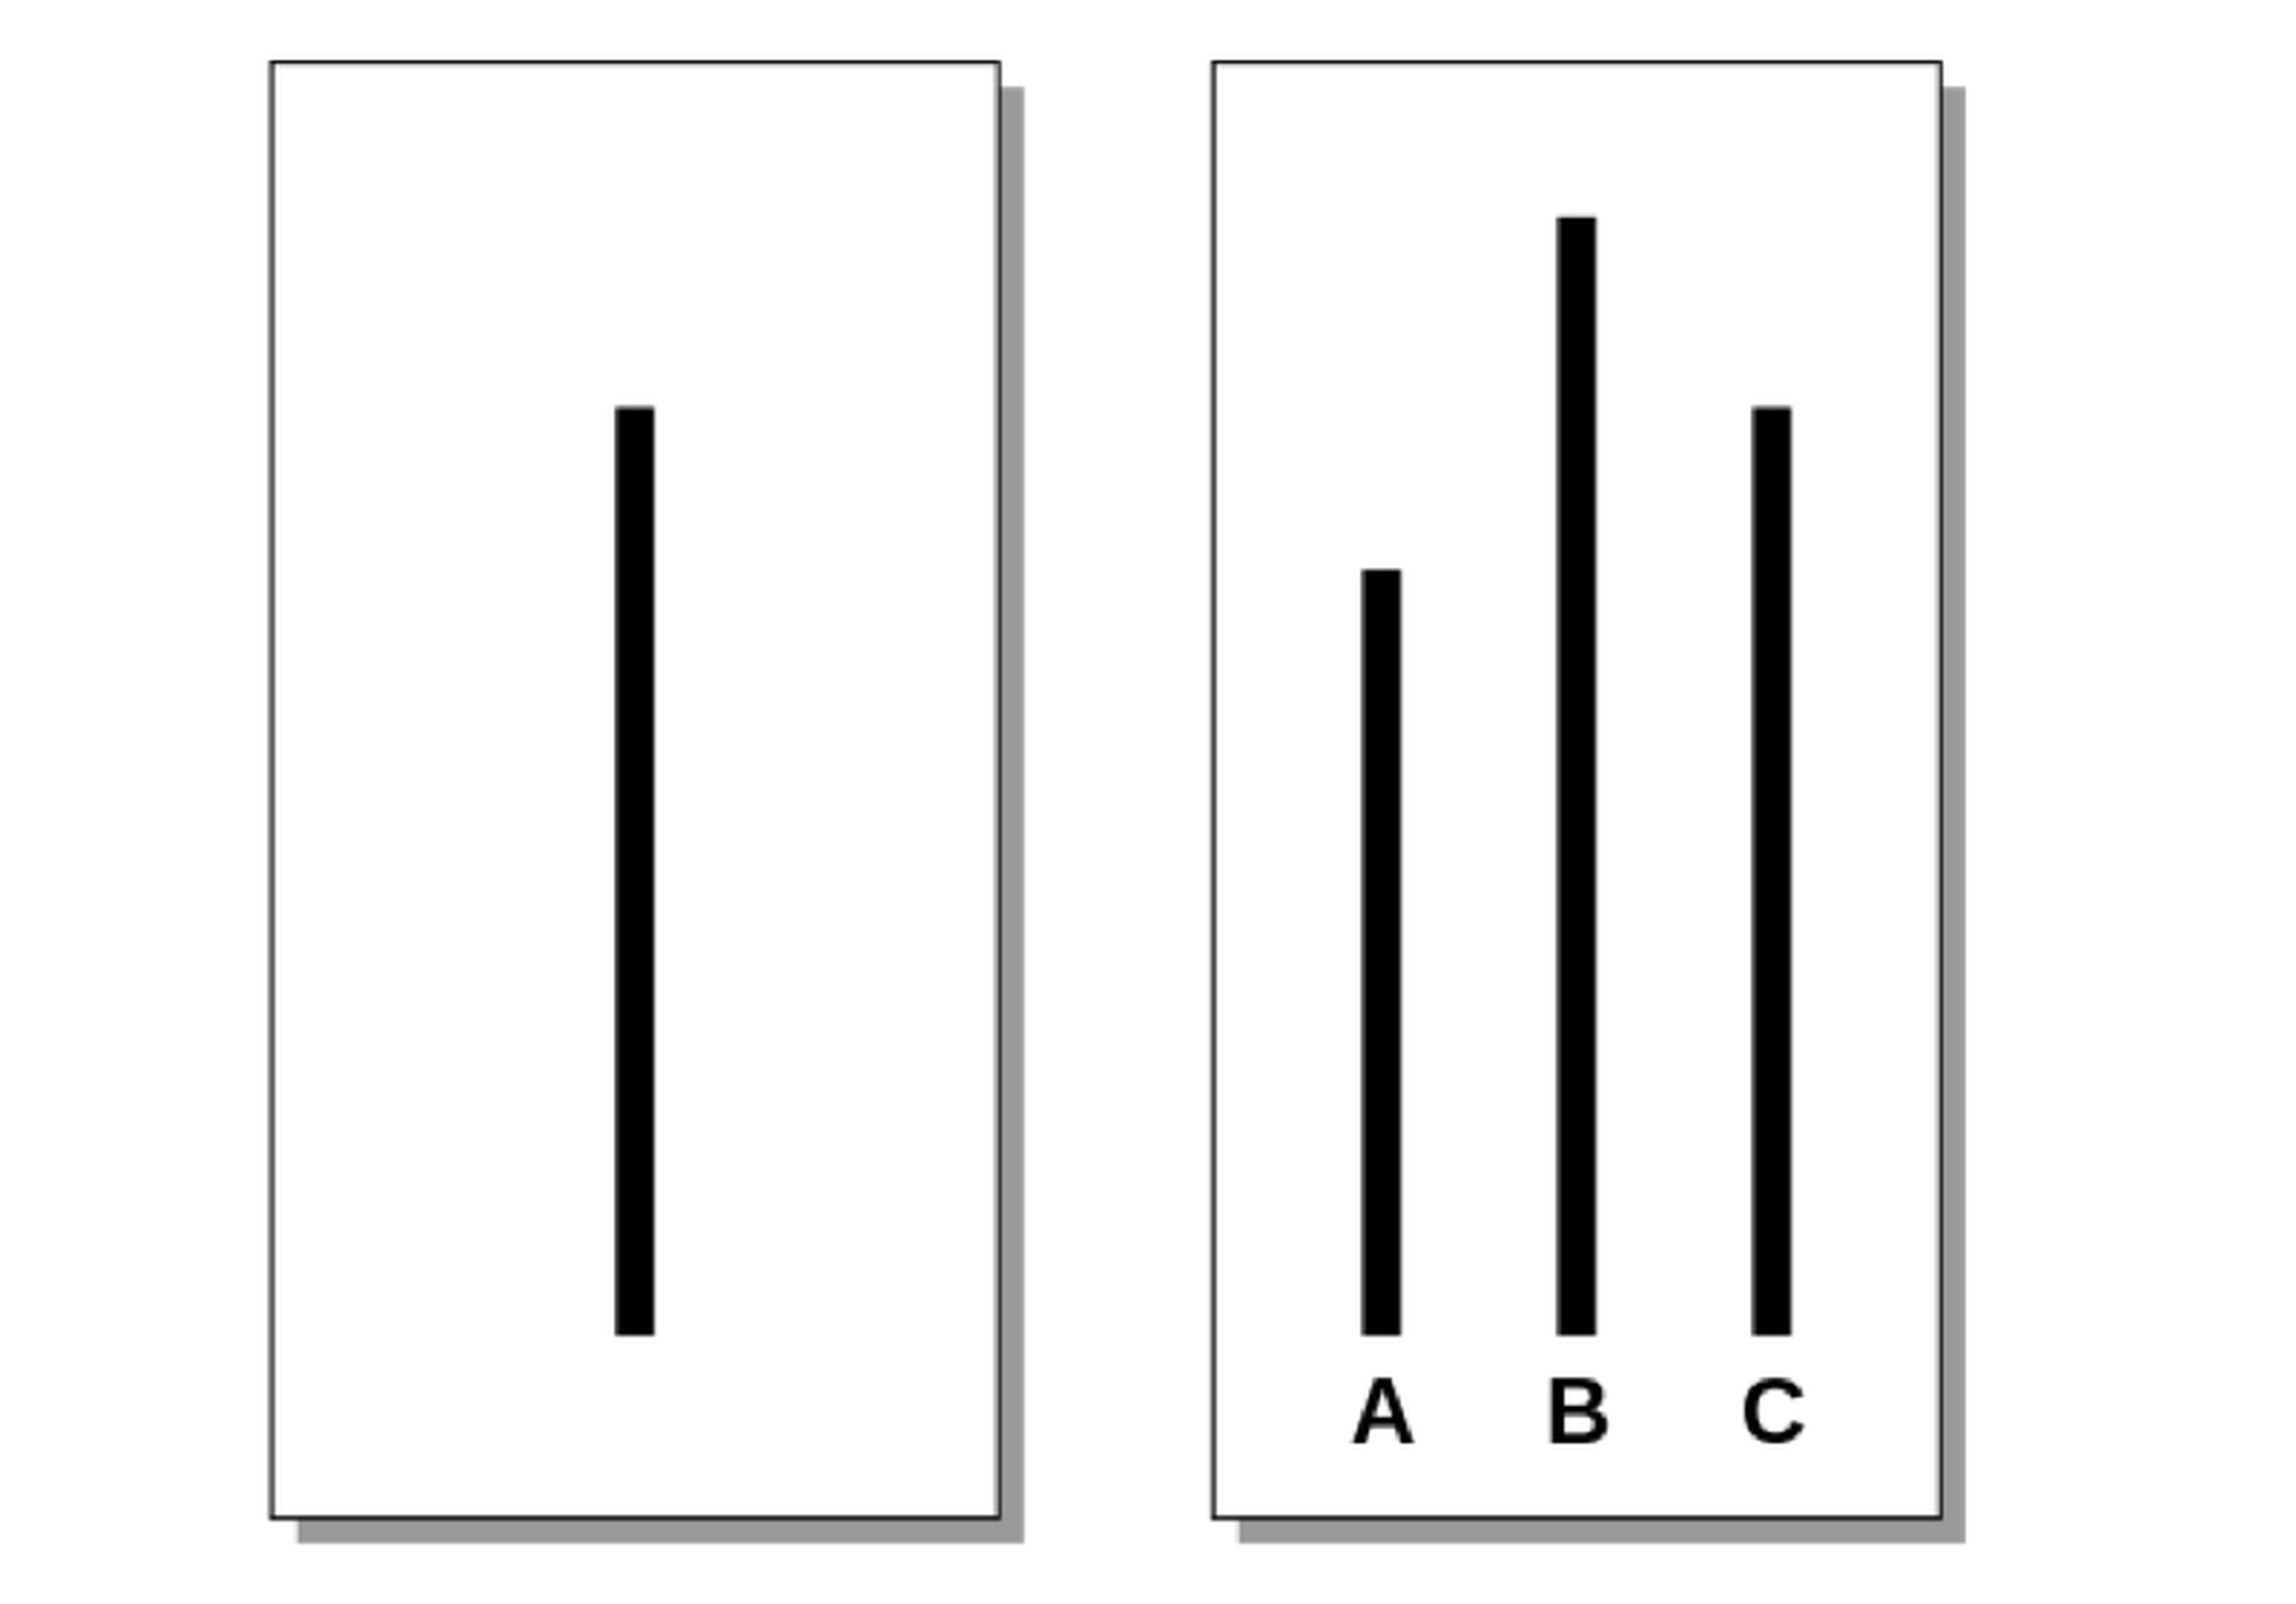 One of the cards used in the original Asch test. Participants had to say which line on the right was closest in length to the line on the left. 